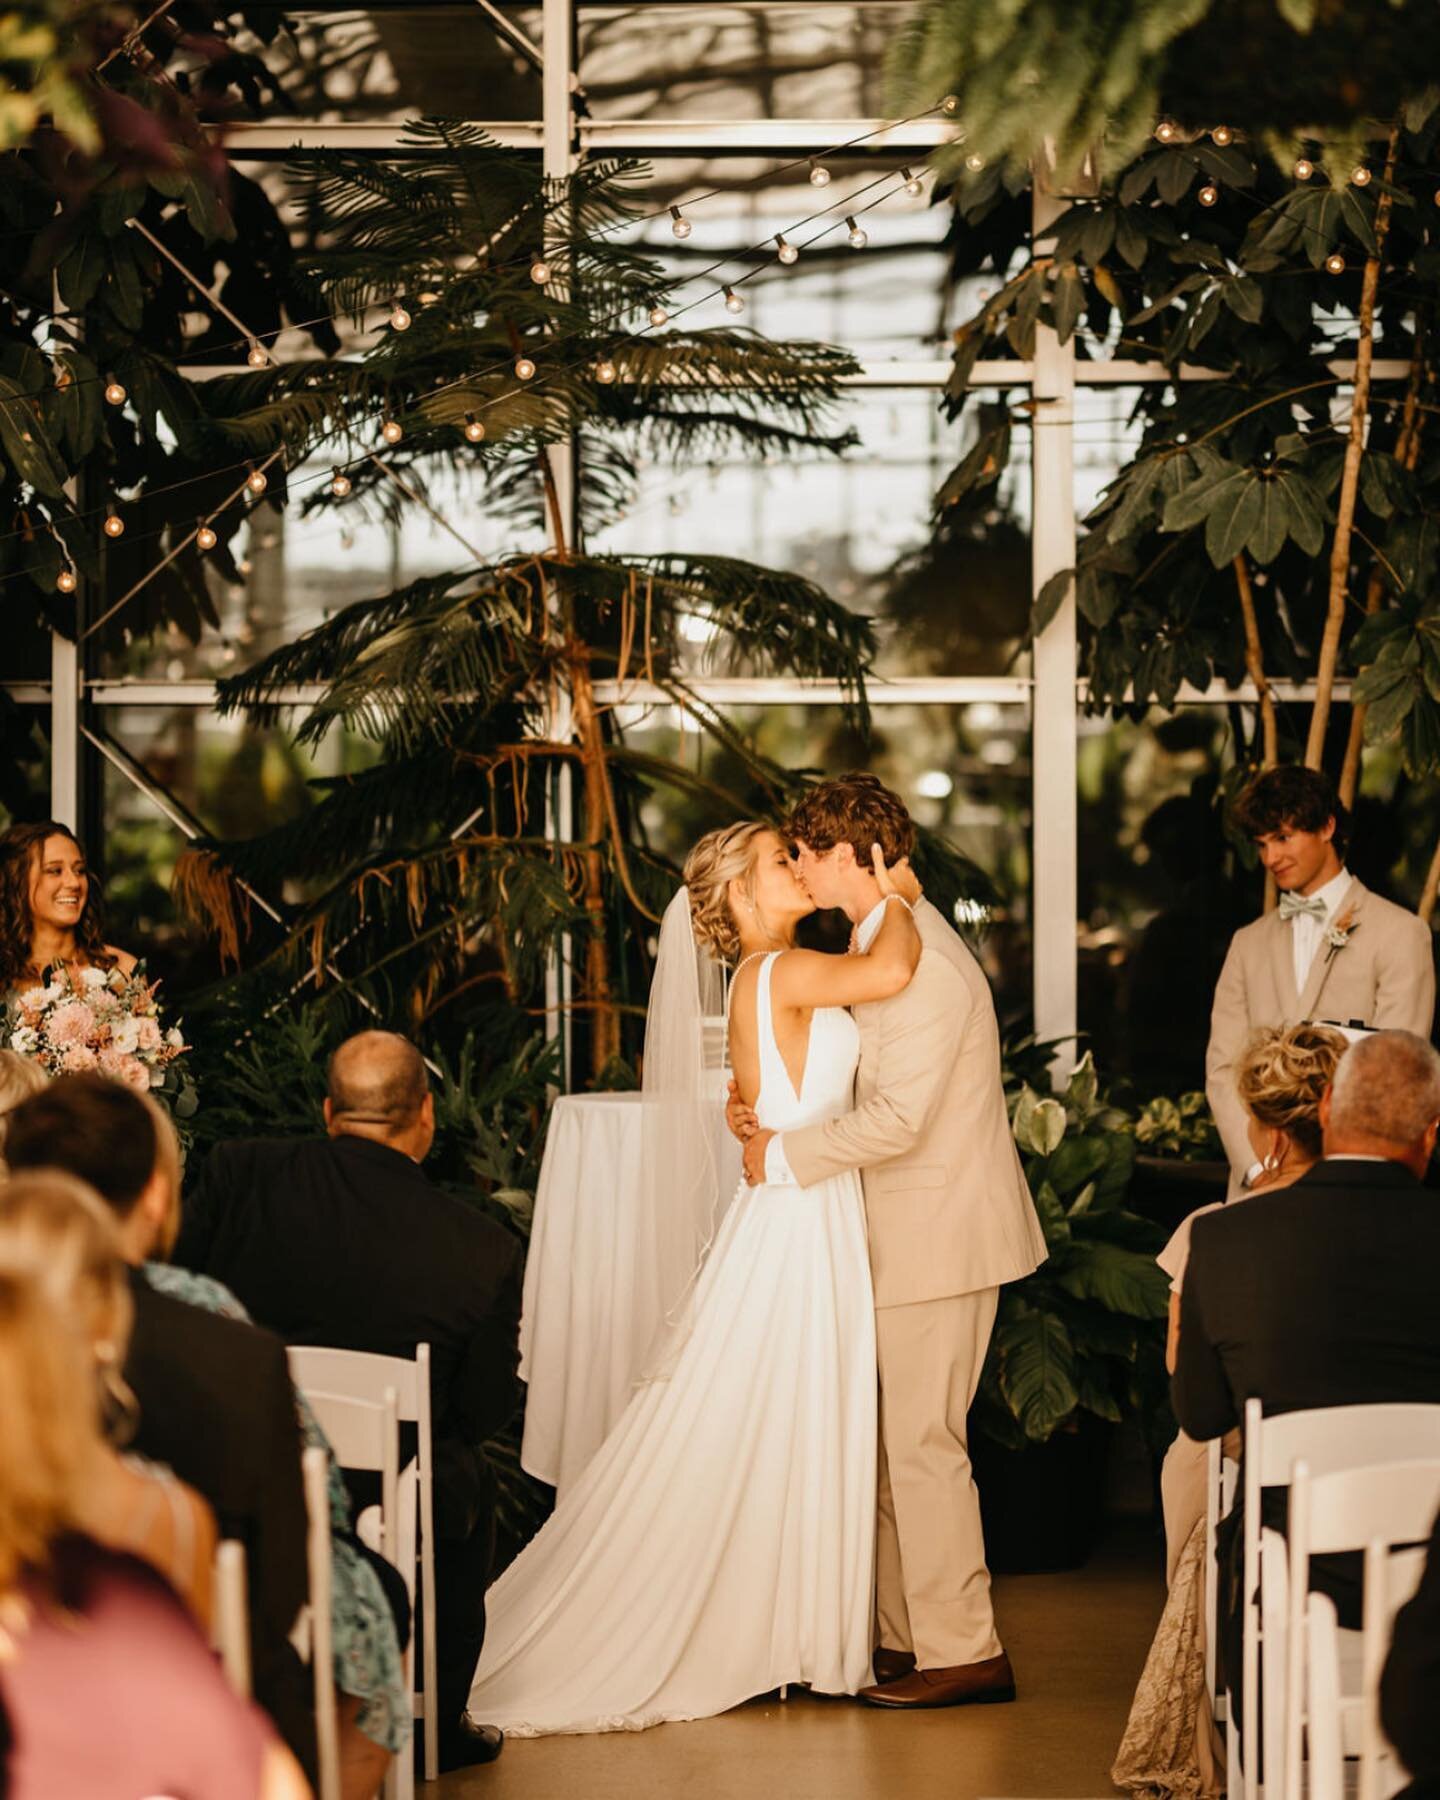 We had so much fun capturing Allison &amp; Max&rsquo;s sweet day! They opted for a first touch before seeing eachother down the isle and what a sweet moment it was. Congrats, Allison &amp; Max!!! 🥰🥰🥰